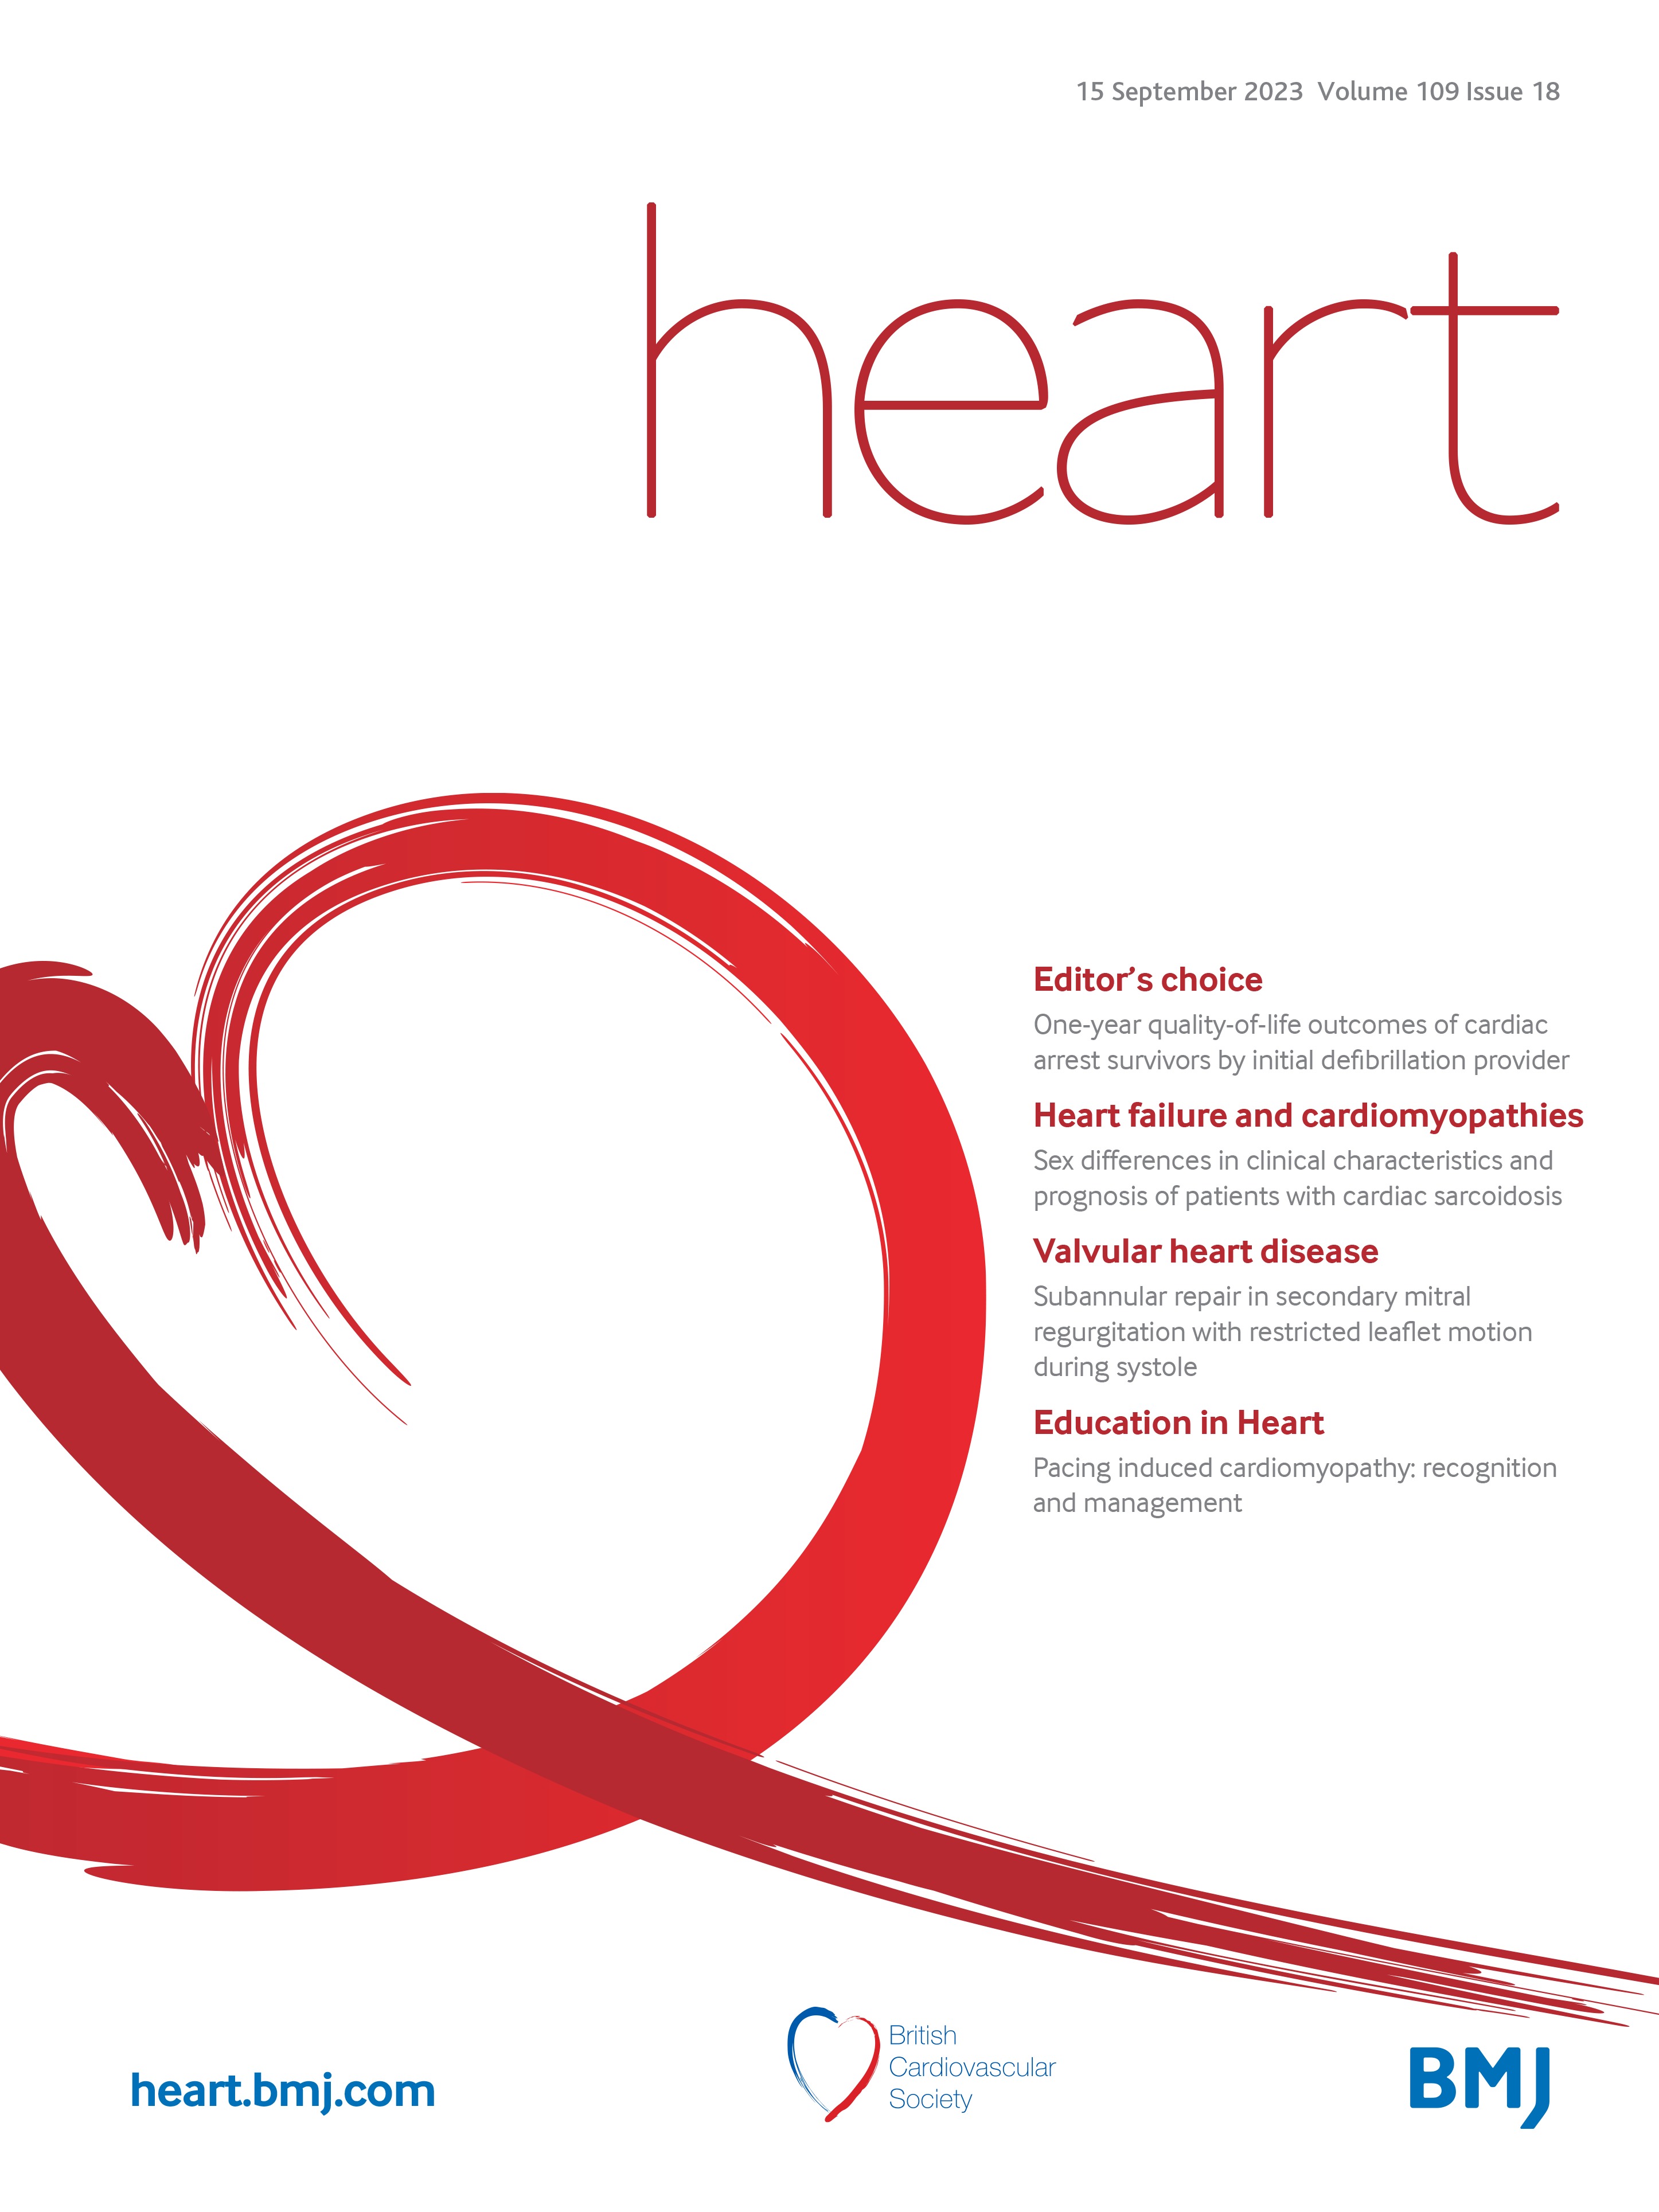 Shortening time to defibrillation in shockable cardiac arrest matters: how do we do it?